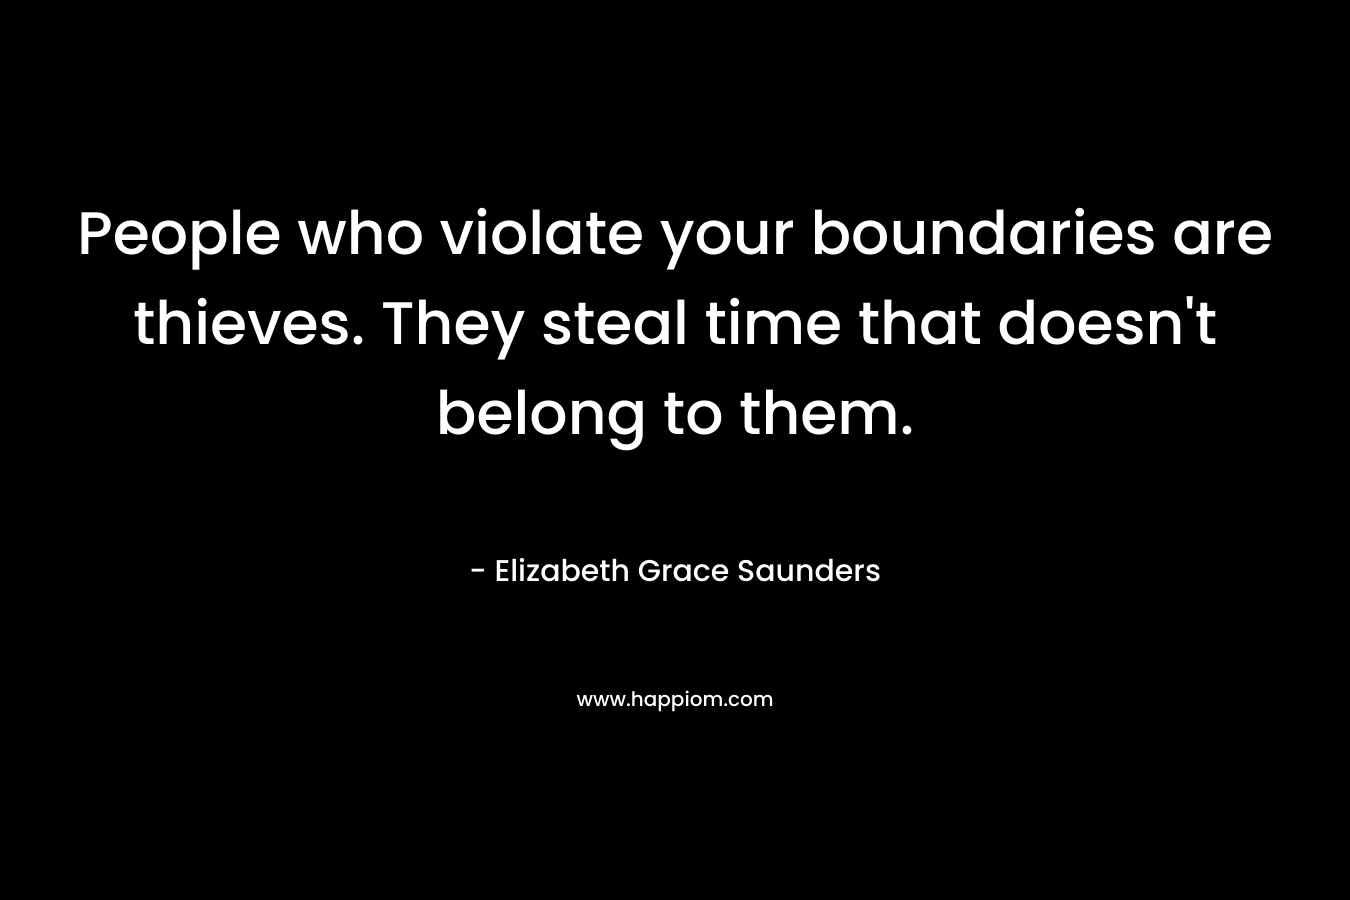 People who violate your boundaries are thieves. They steal time that doesn’t belong to them. – Elizabeth Grace Saunders